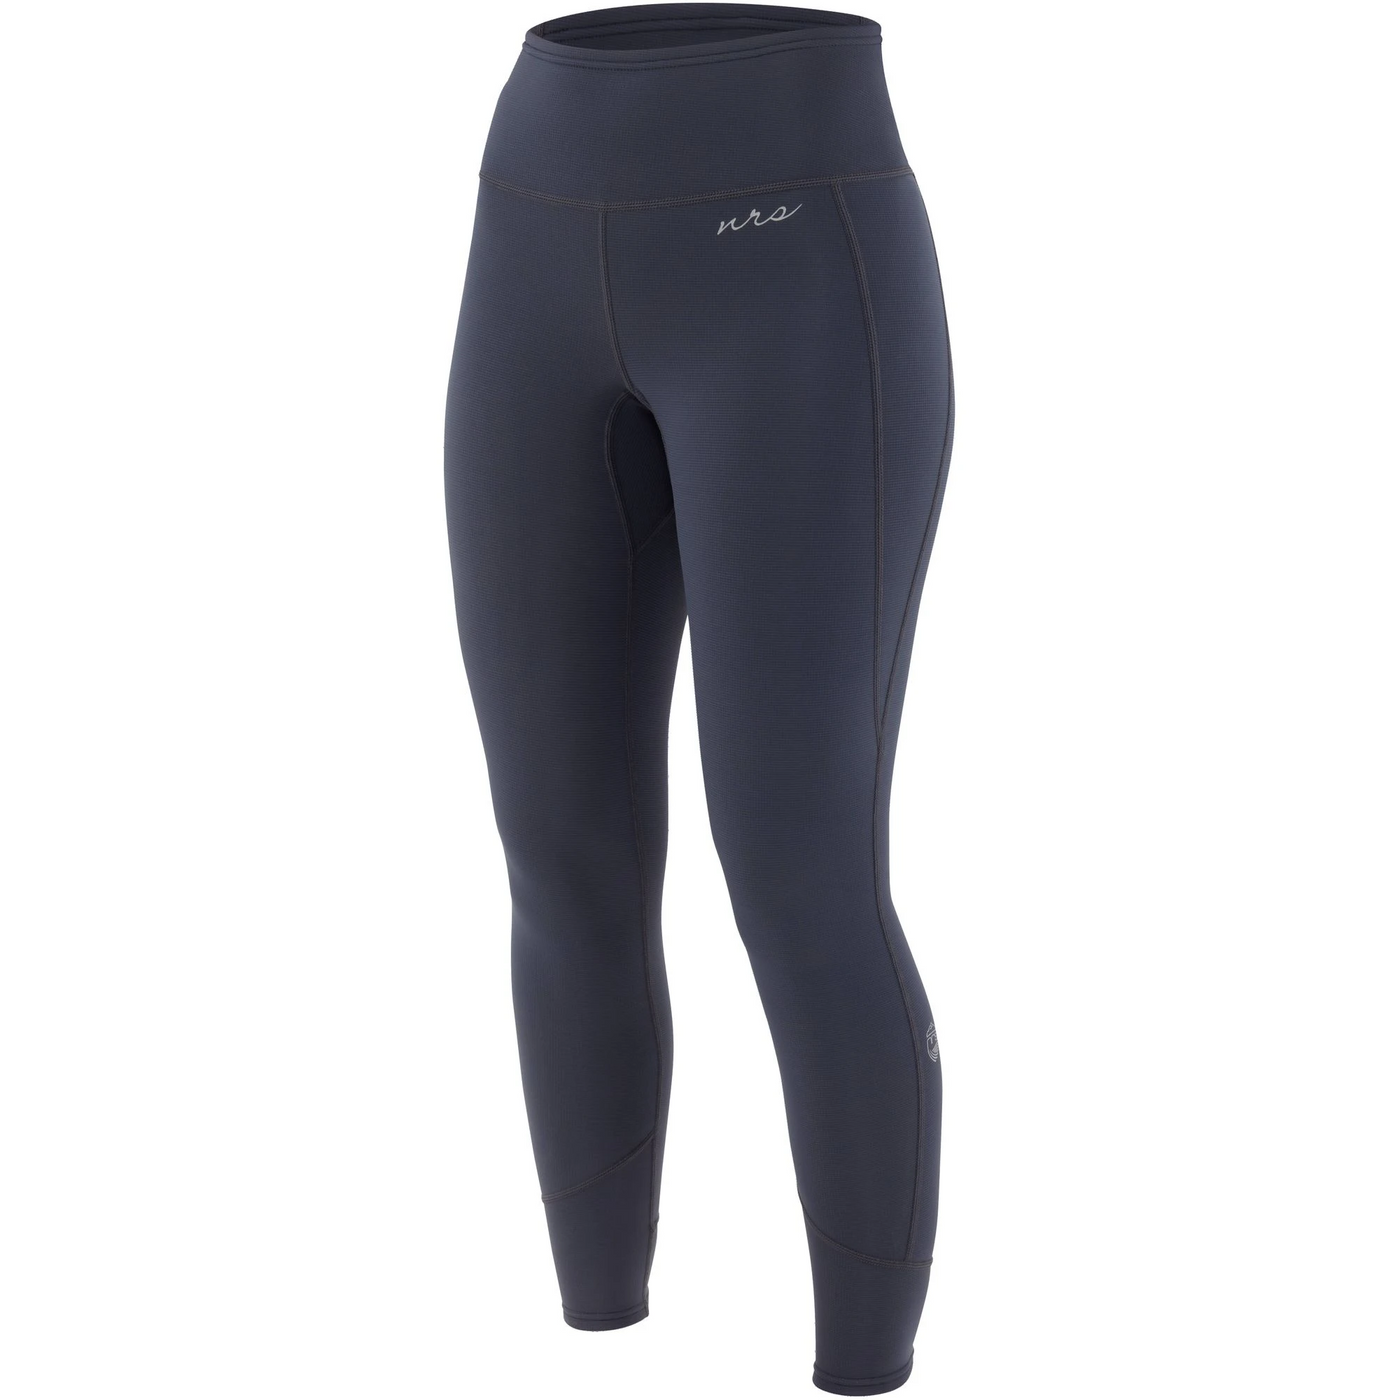 NRS Womens HydroSkin 0.5 Pant (clearance)